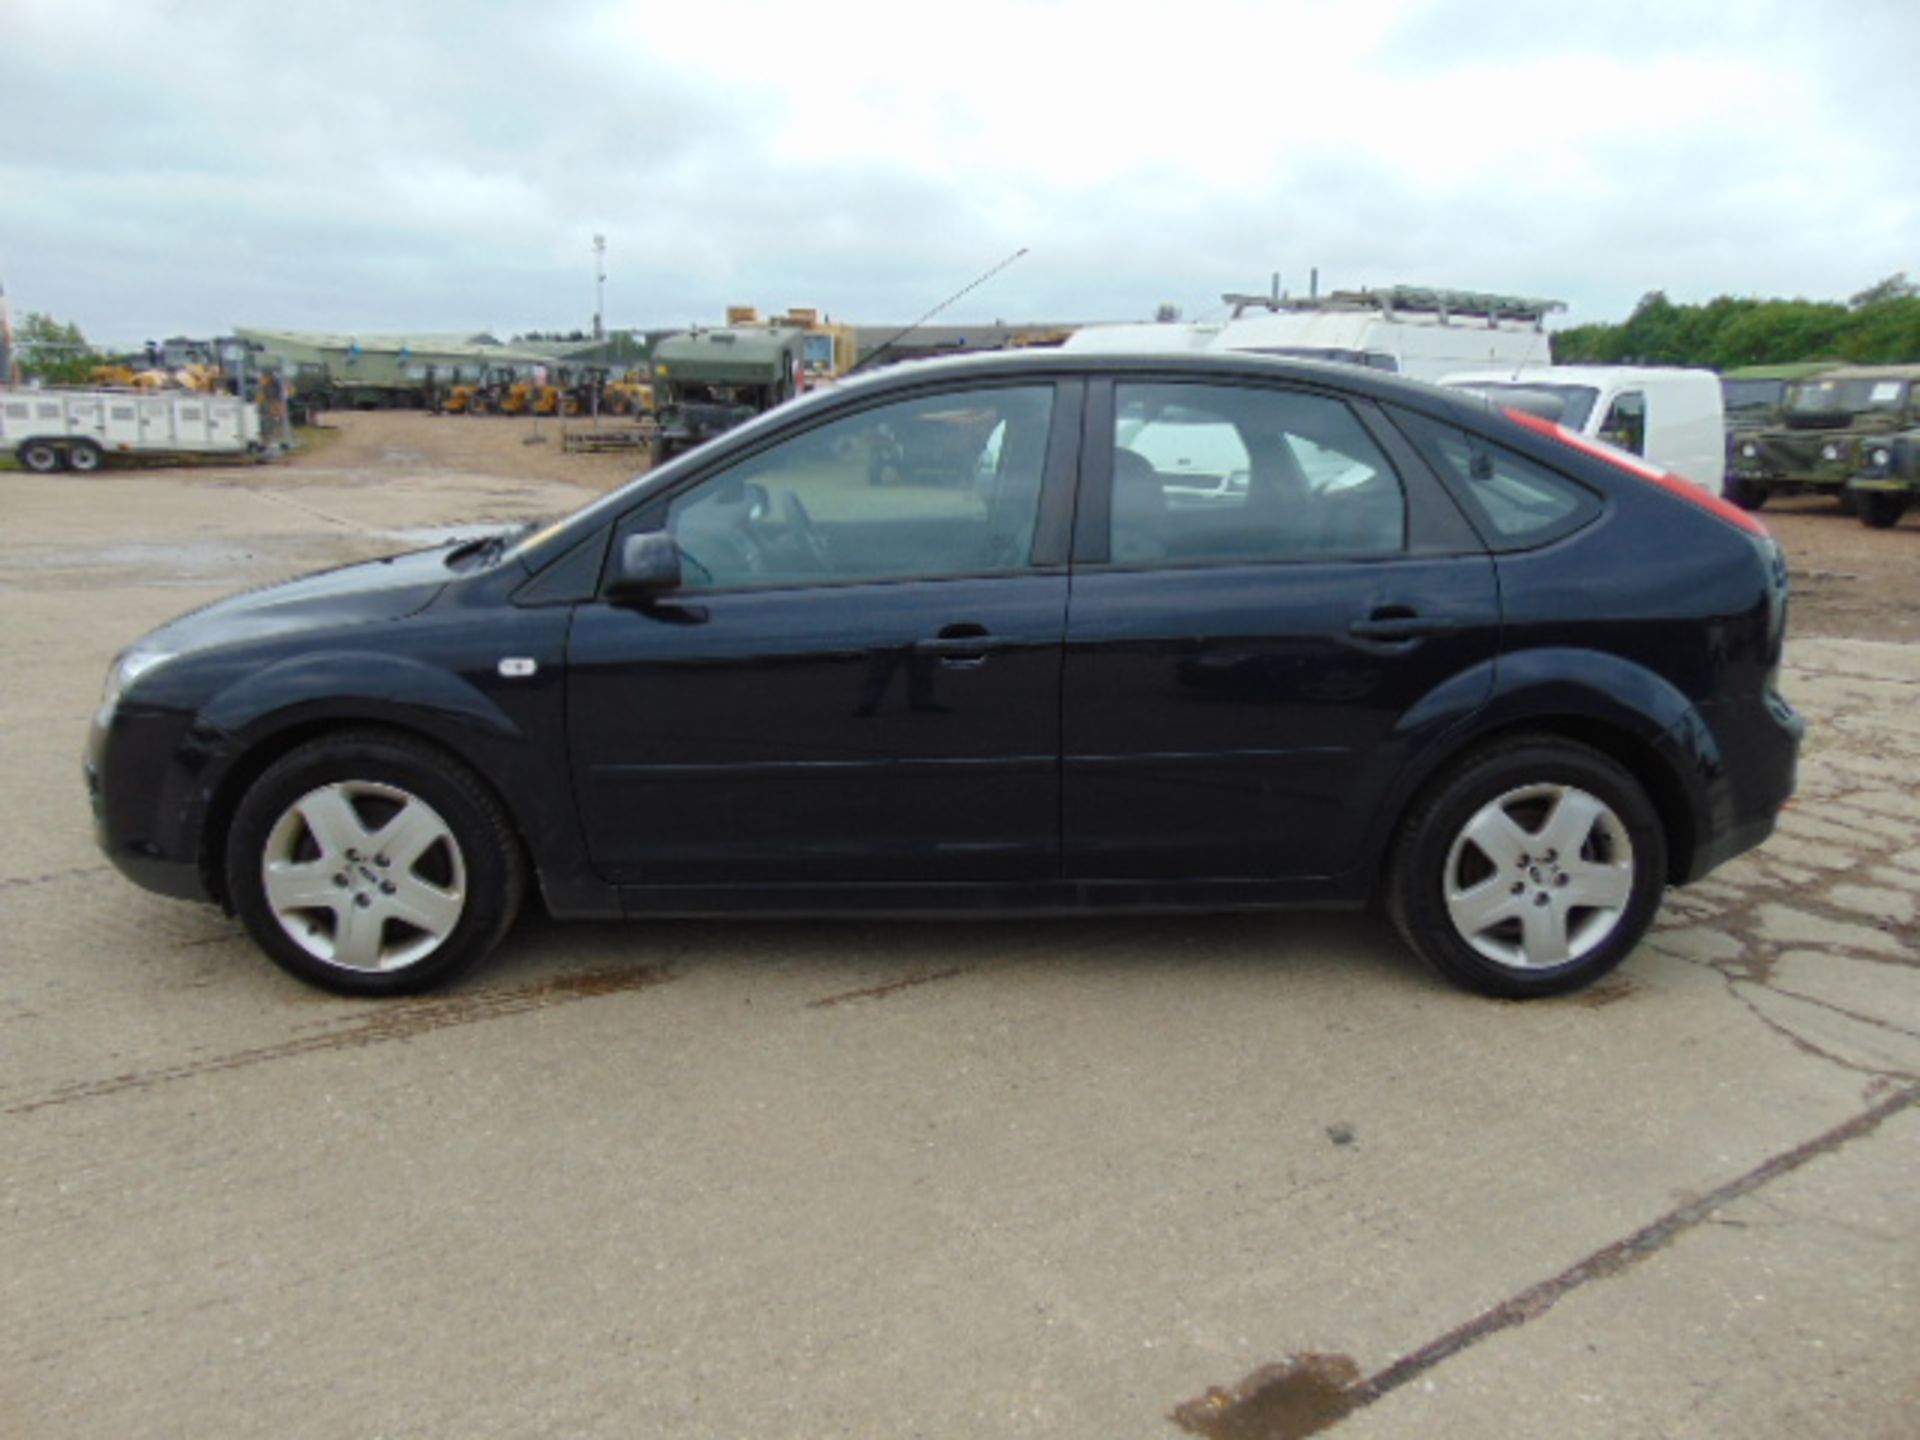 2008 Ford Focus 1.8 TDCI Style Hatchback - Image 4 of 18